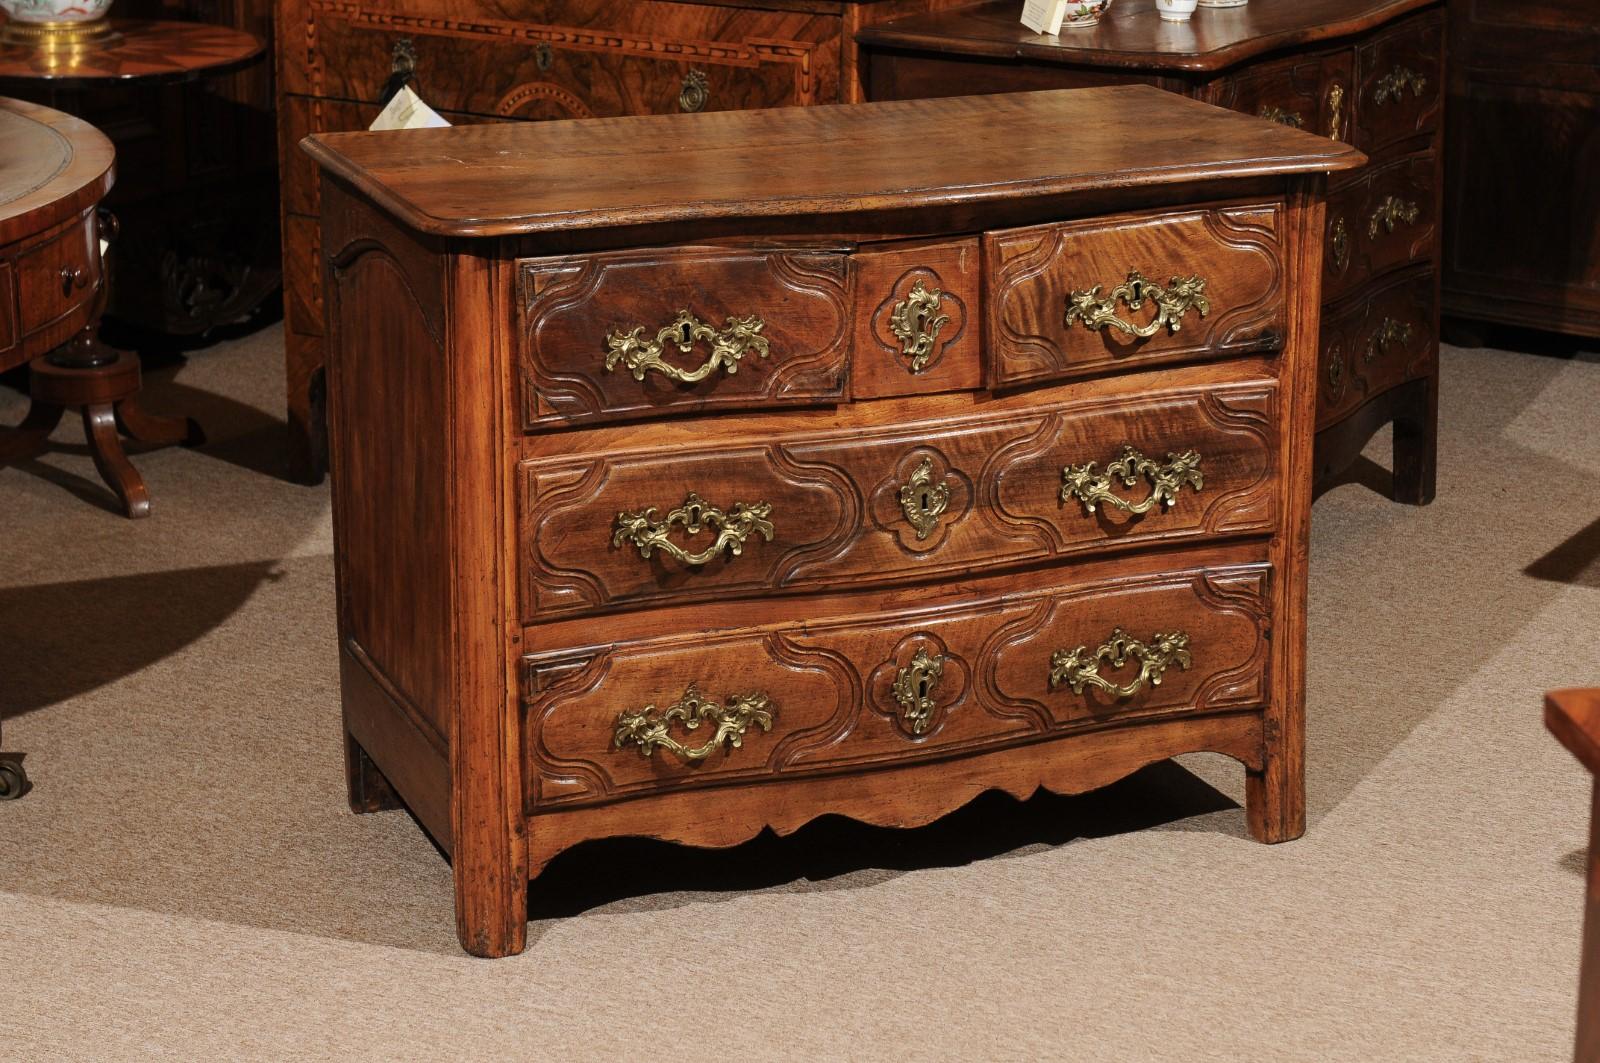 Louis XV period walnut commode with shaped apron and five (5) carved drawers--2 full width drawers below two small and one hidden/secret drawer, 18th century, France.